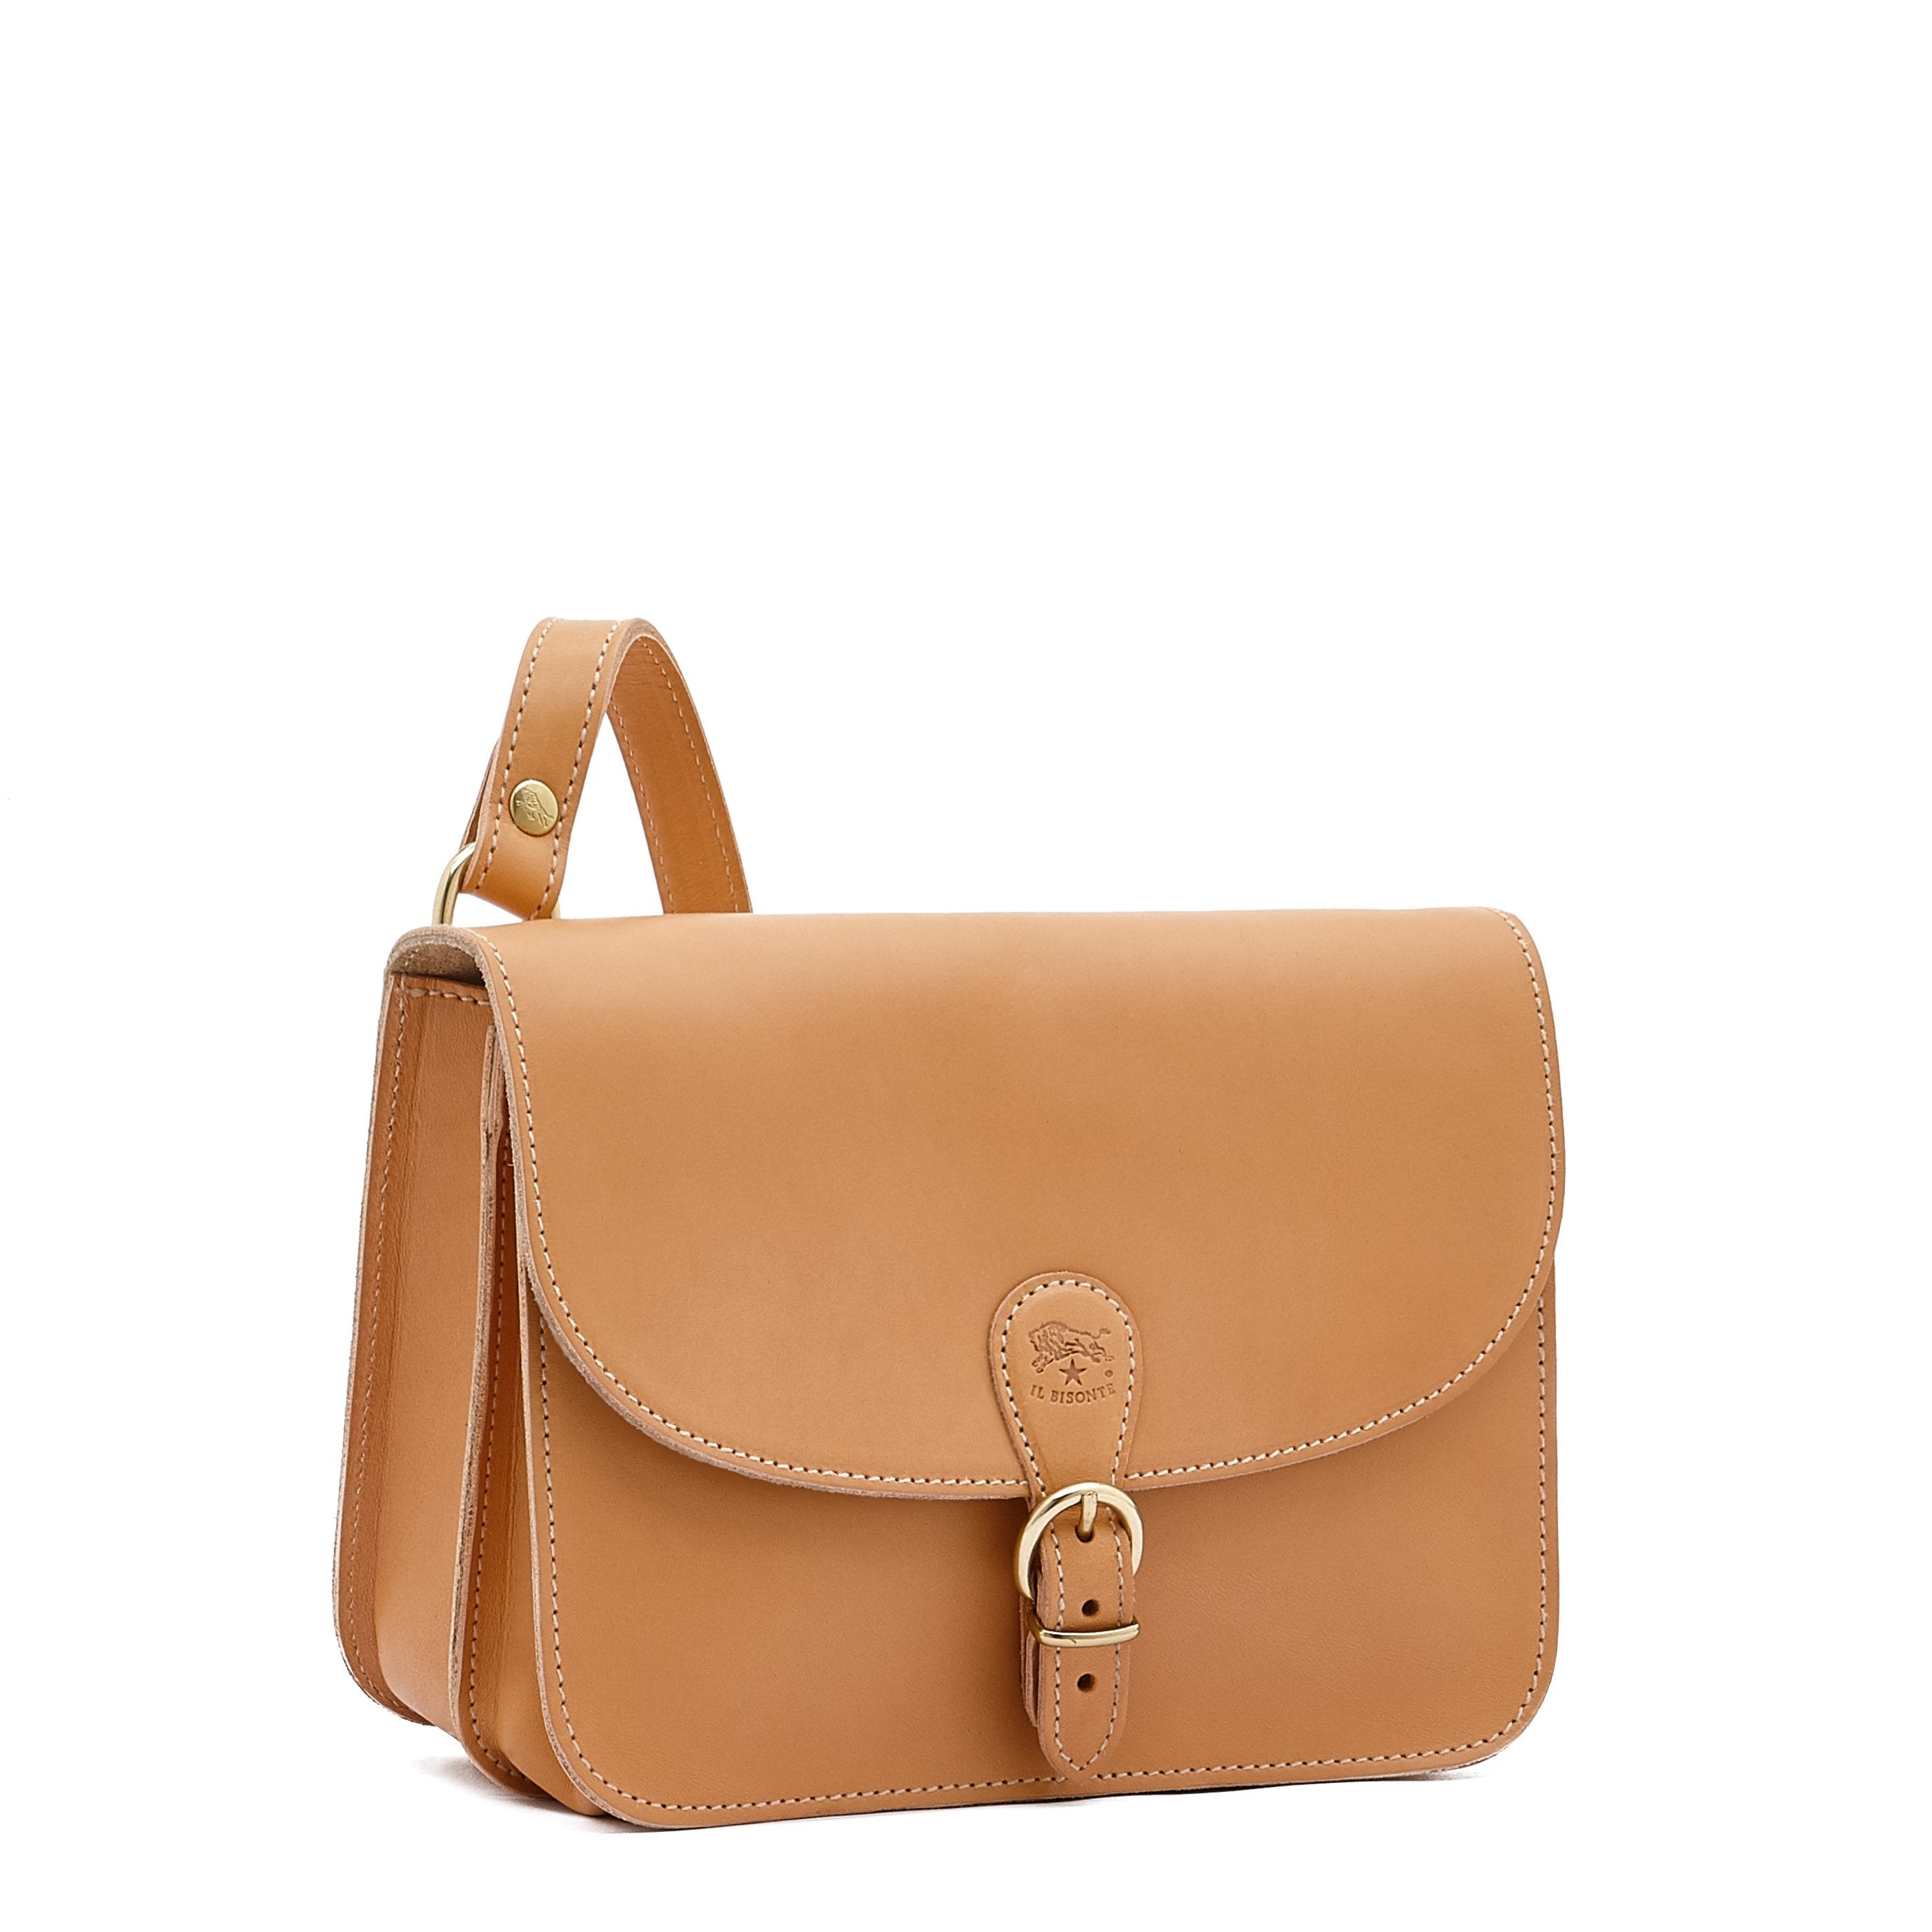 Rachele | Women's Crossbody Bag in Leather color Natural